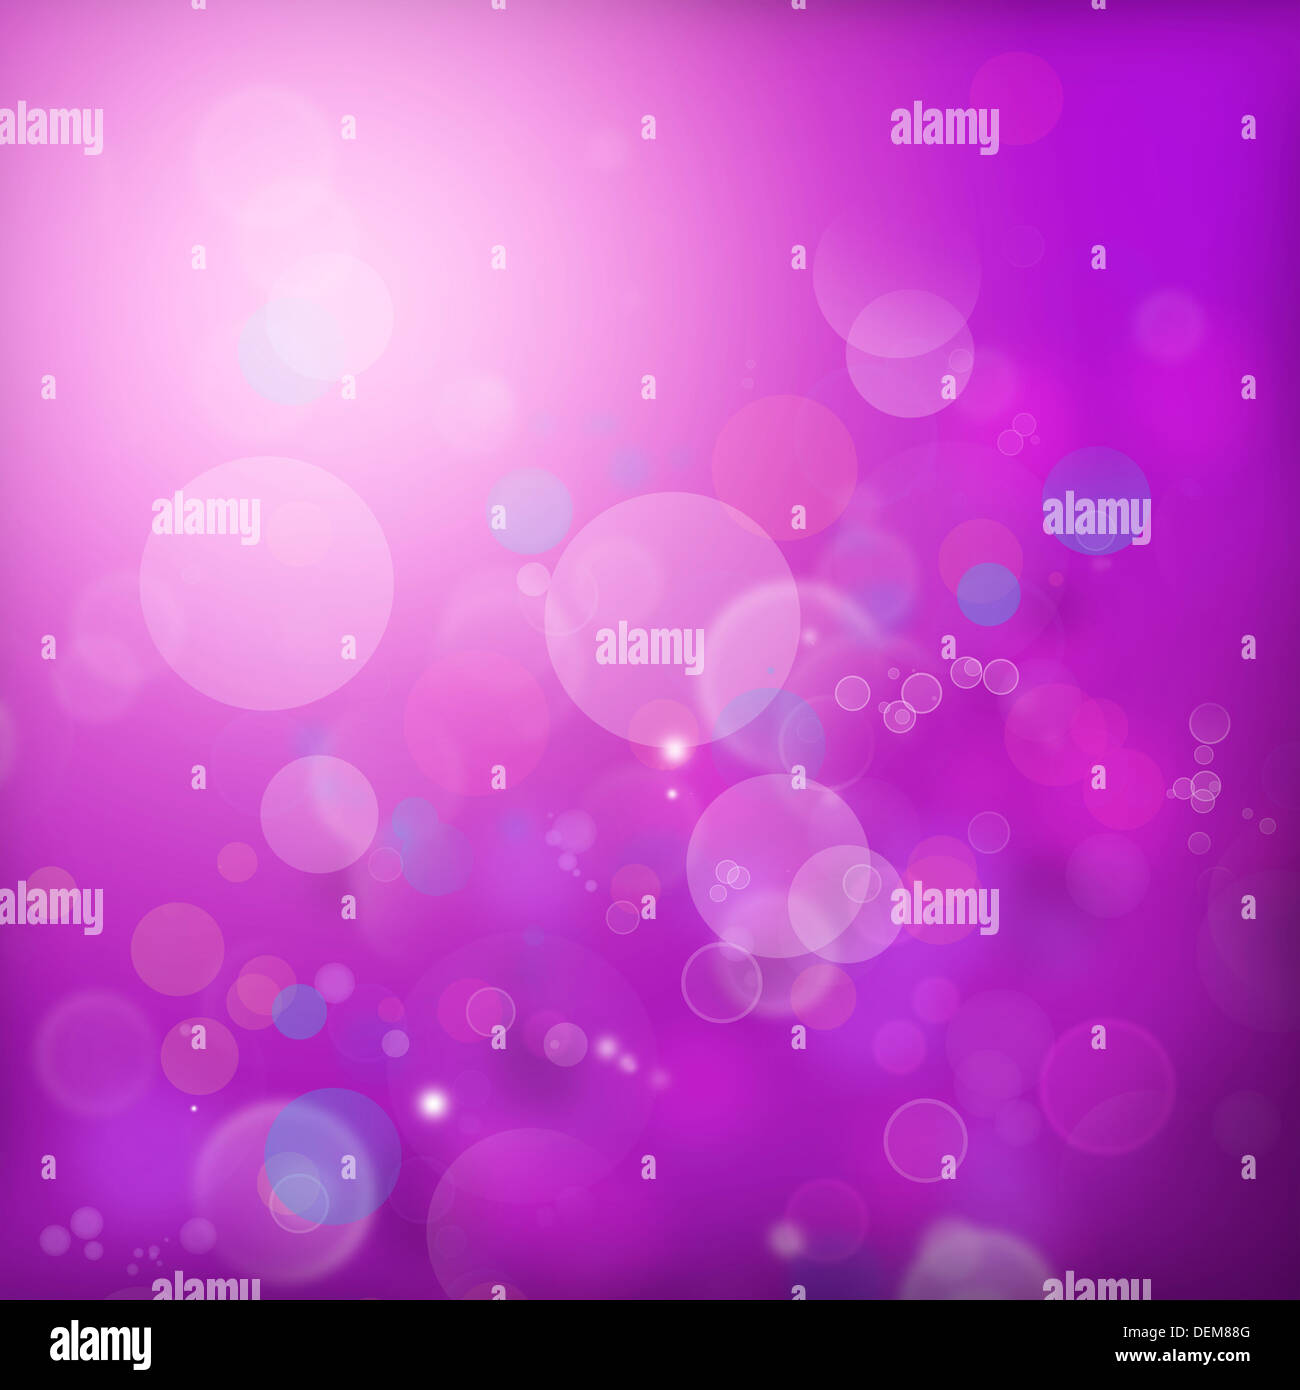 Circles abstract pink color background Stock Photo